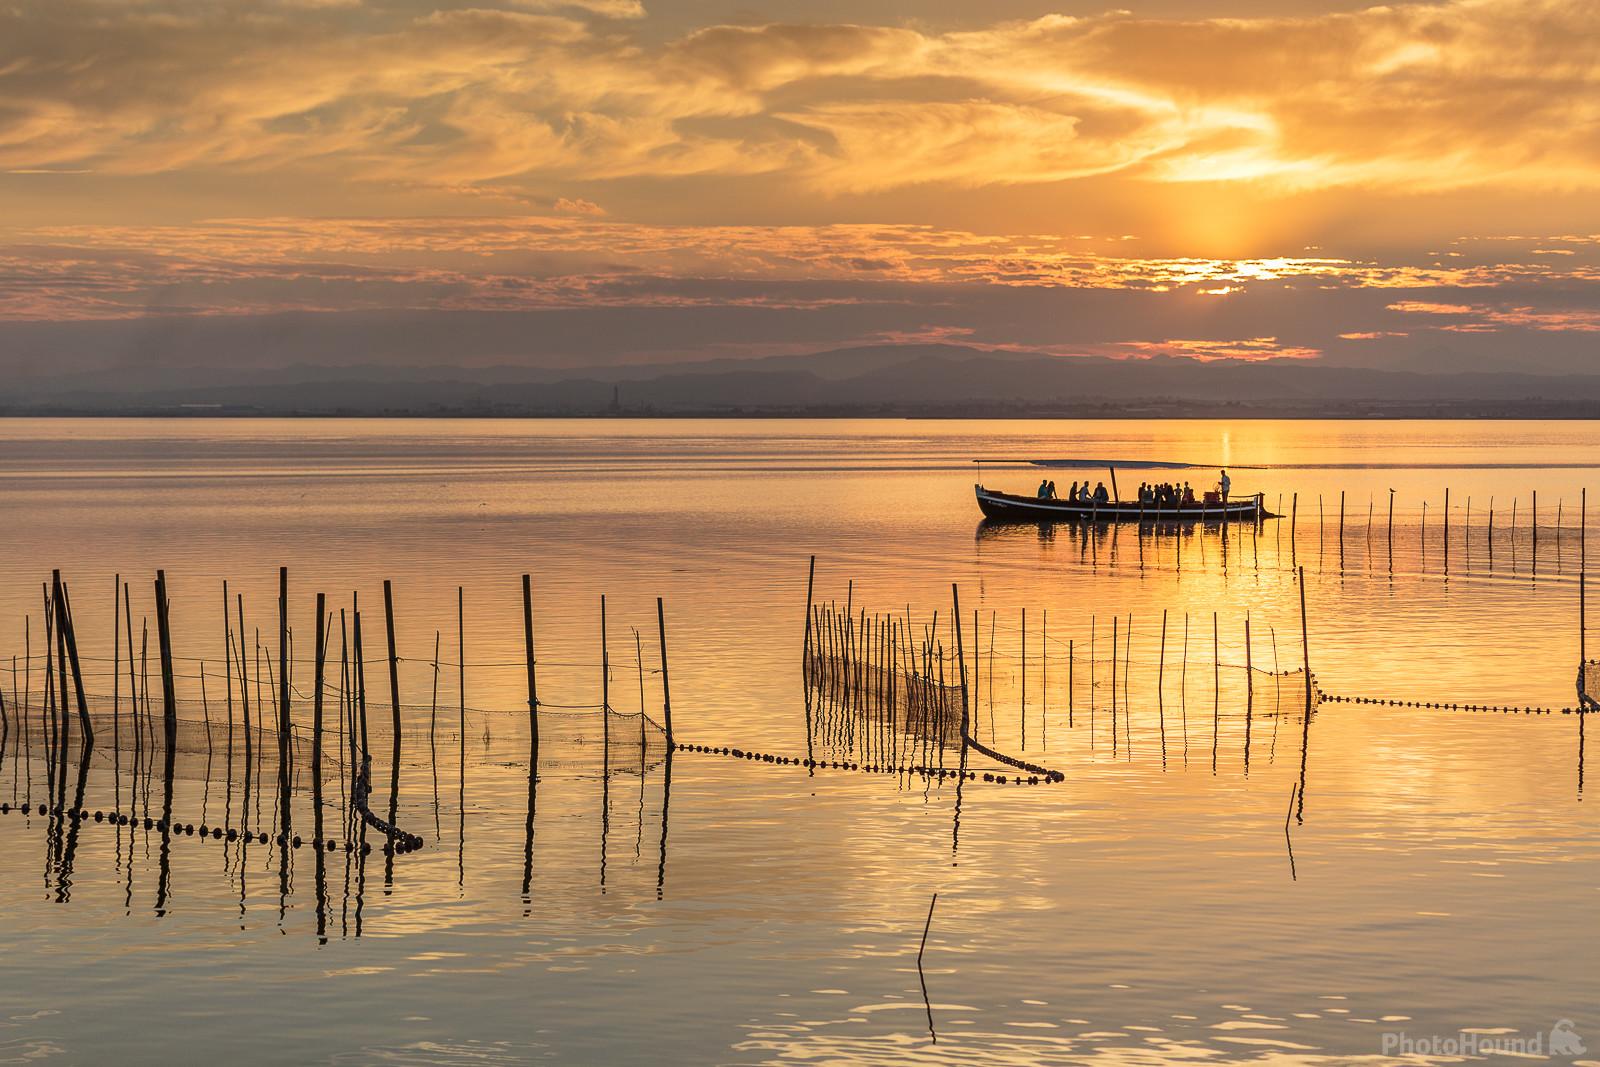 Image of Sunset at Albufera by Sergio Ramón